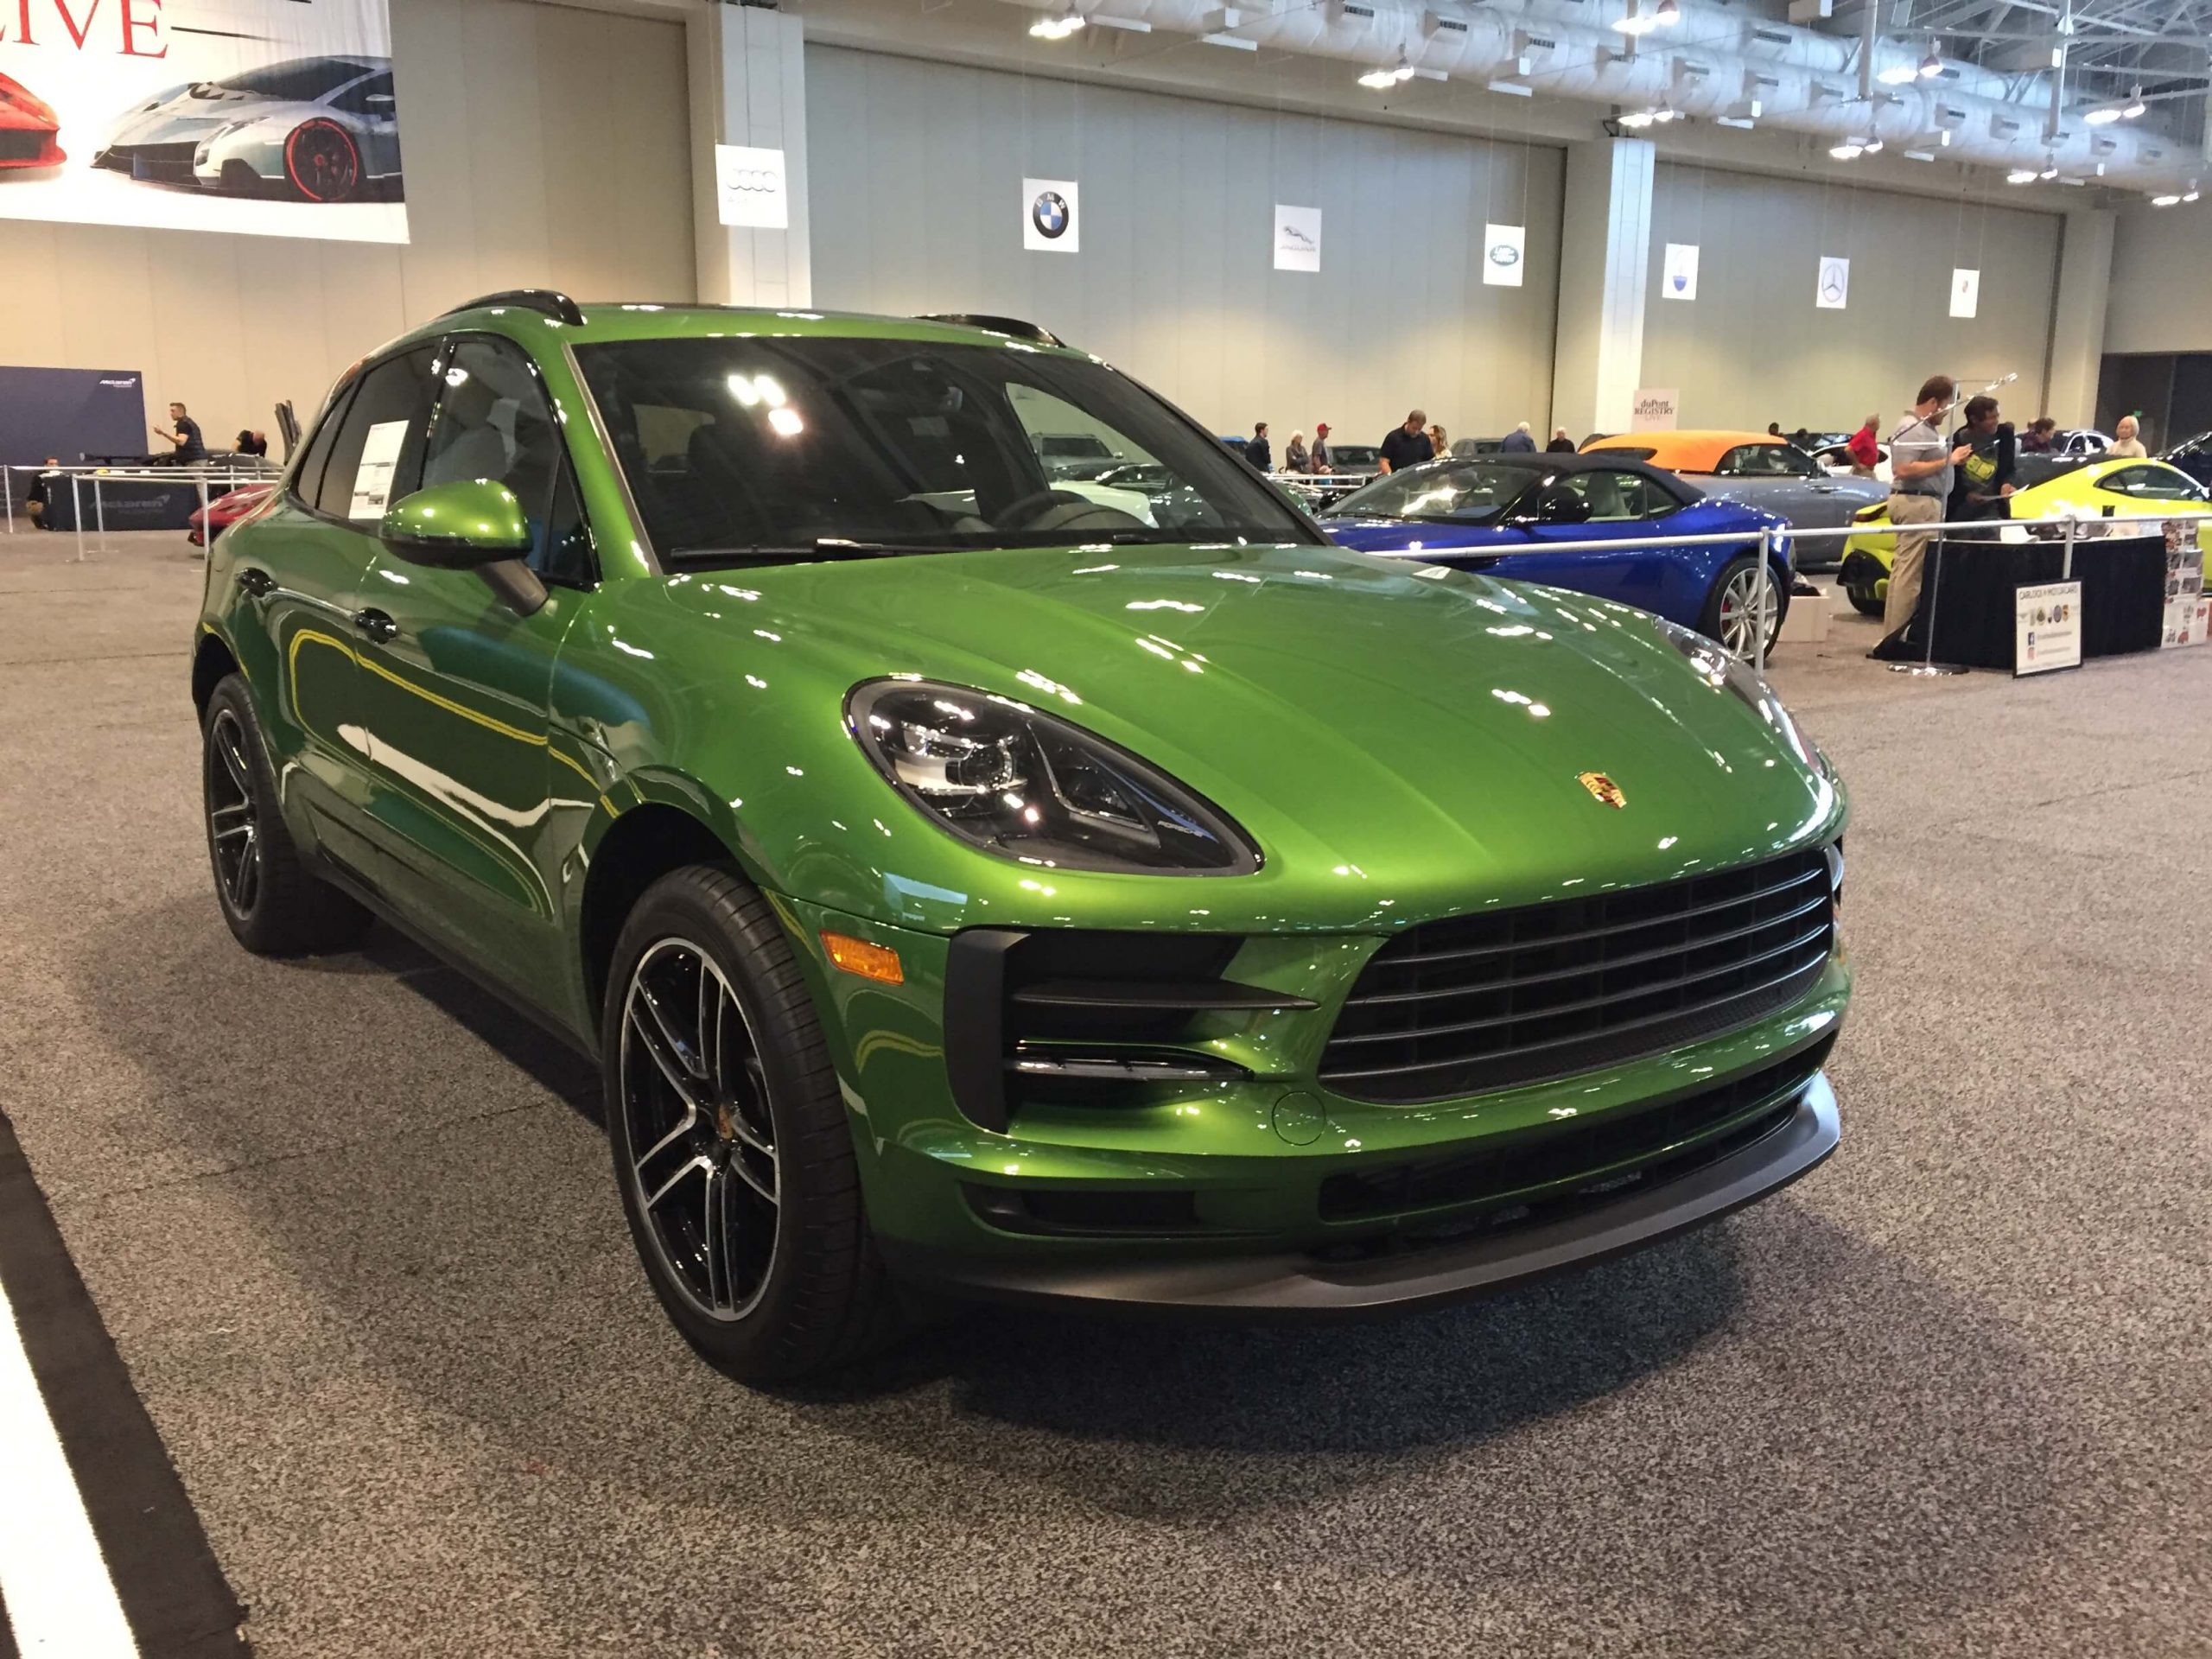 What's New in Nashville? Auto Show Coverage From Car Show Safari